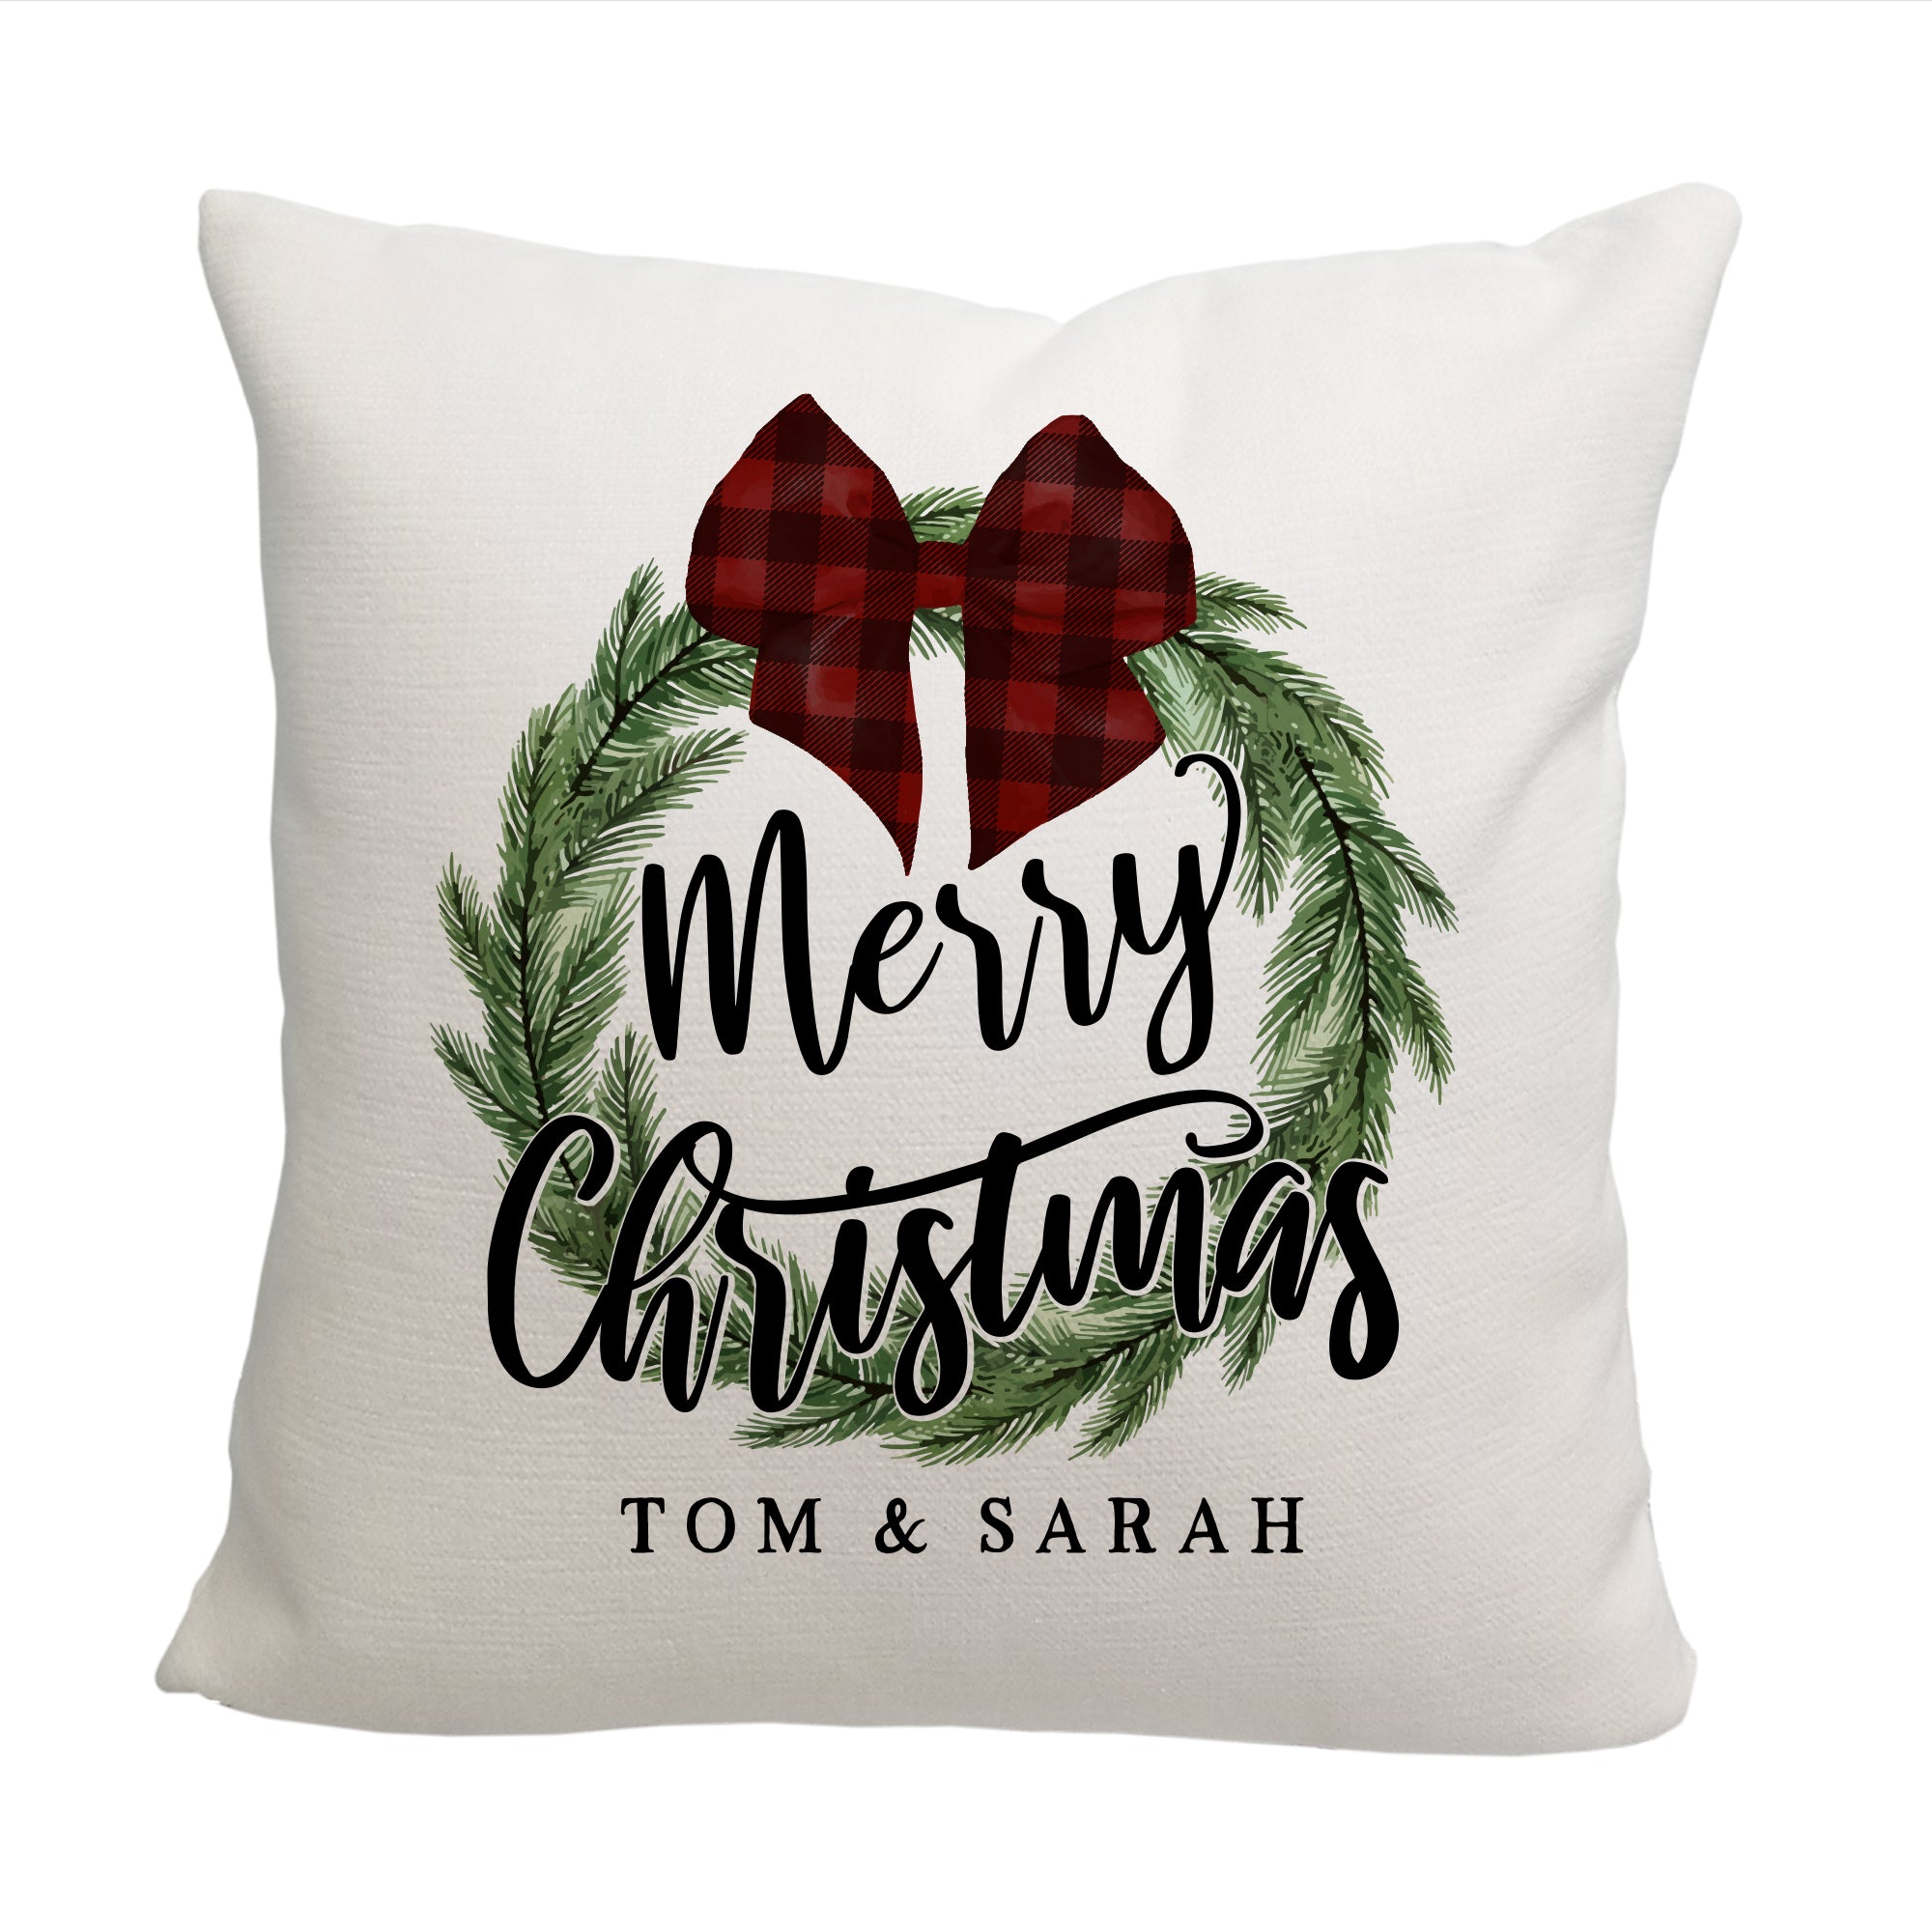 Merry Christmas Wreath Throw Pillow - Cover Only OR Cover with Insert